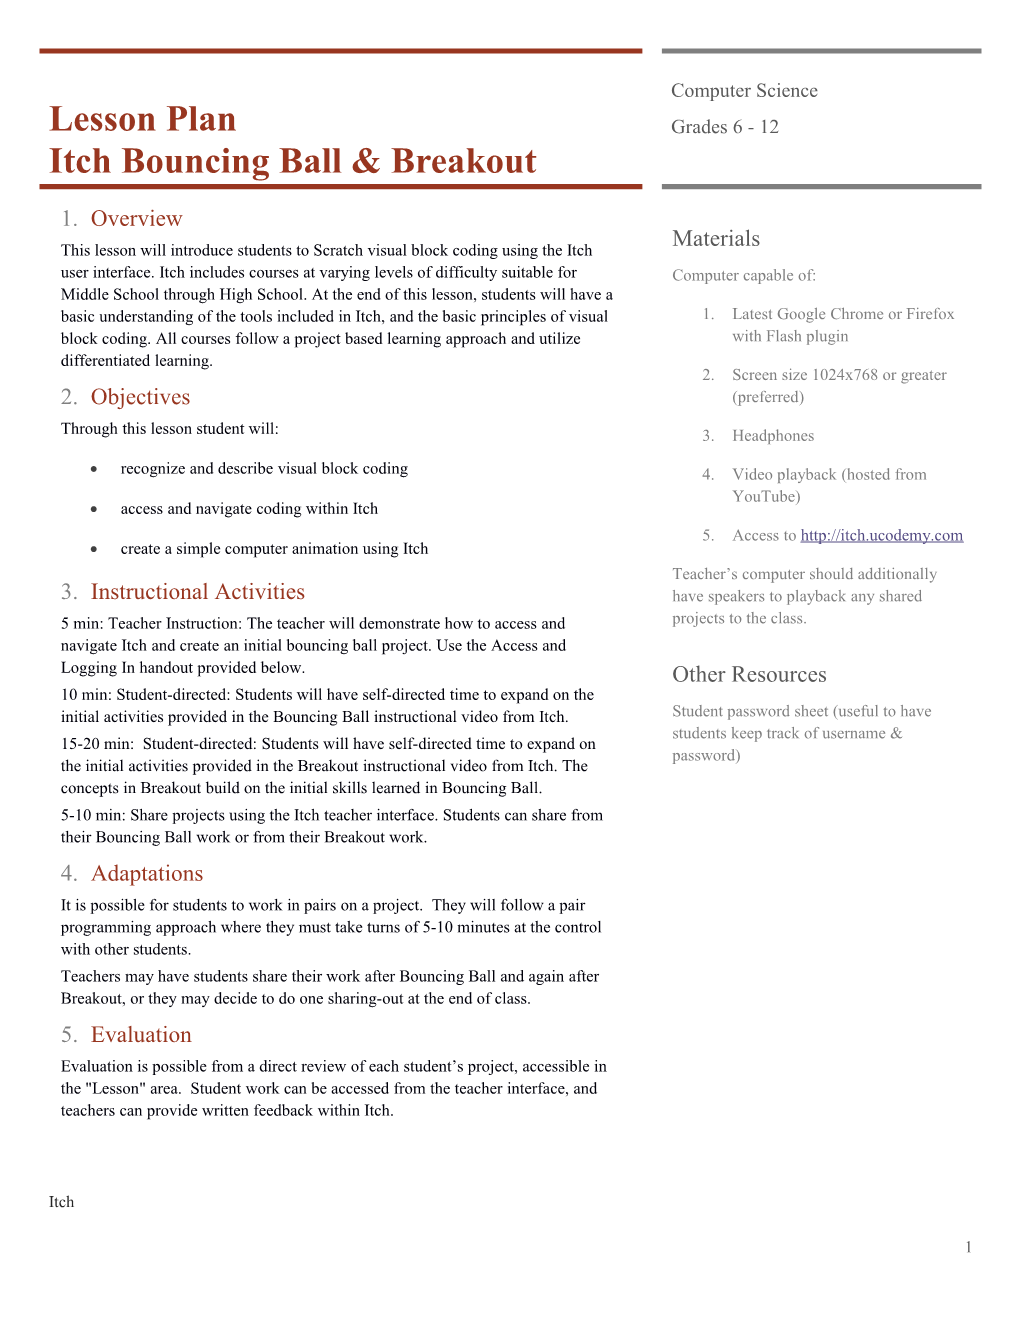 Lesson Plan Itch Bouncing Ball & Breakout